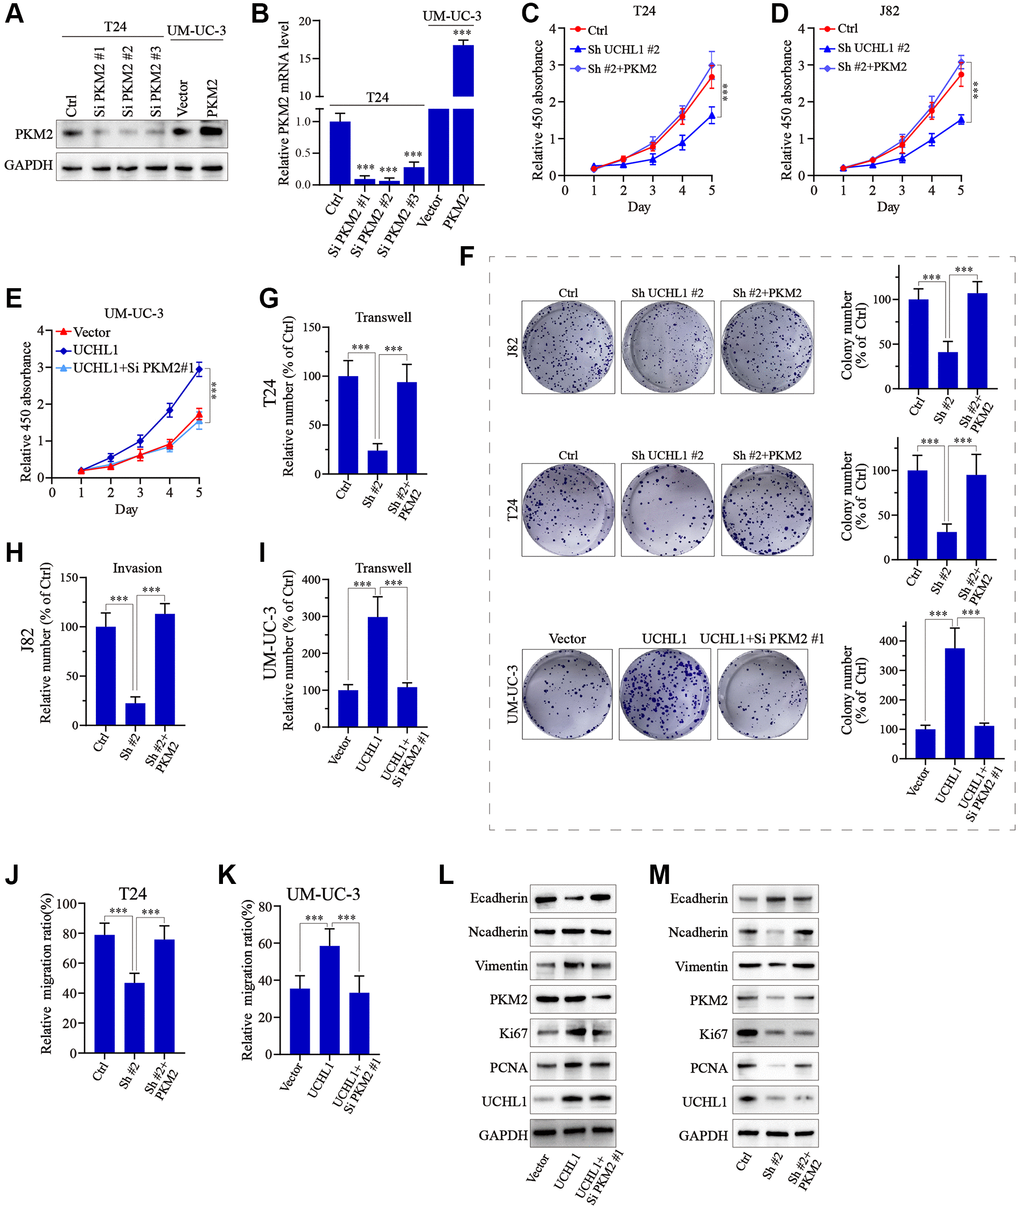 UCHL1 affects proliferation and migration capacity of UBC cells through PKM2 regulation. (A, B) Design and functional validation of PKM2 specific siRNA and overexpression vectors in UBC cancer cell line (T24 and UM-UC-3) via WB/PCR method. (C–E) CCK8 assay on UBC cell line groups respectively transfected with UCHL1 shRNA/overexpression vector in combination of PKM2 overexpression/siRNAs (n = 3). (F) Colony formation assay on UBC cell line groups respectively transfected with UCHL1 shRNAs/overexpression vector alone or in combination of PKM2 siRNA/overexpression vectors (n = 3). (G–I) Transwell and cellular invasion assay on UBC cell line groups transfected with UCHL1 shRNAs/overexpression alone or in combination with PKM2 siRNAs/overexpression vectors (n = 3). (J, K) Wound healing experiments on UBC cell line groups transfected with UCHL1 shRNAs/overexpression vector alone or in combination of PKM2 overexpression/siRNAs (n = 3). (L, M) WB investigation on EMT biomarkers and proliferation biomarkers in UBC cell line groups transfected UCHL1 shRNAs/overexpression vector alone or in combination of PKM2 overexpression/siRNAs.